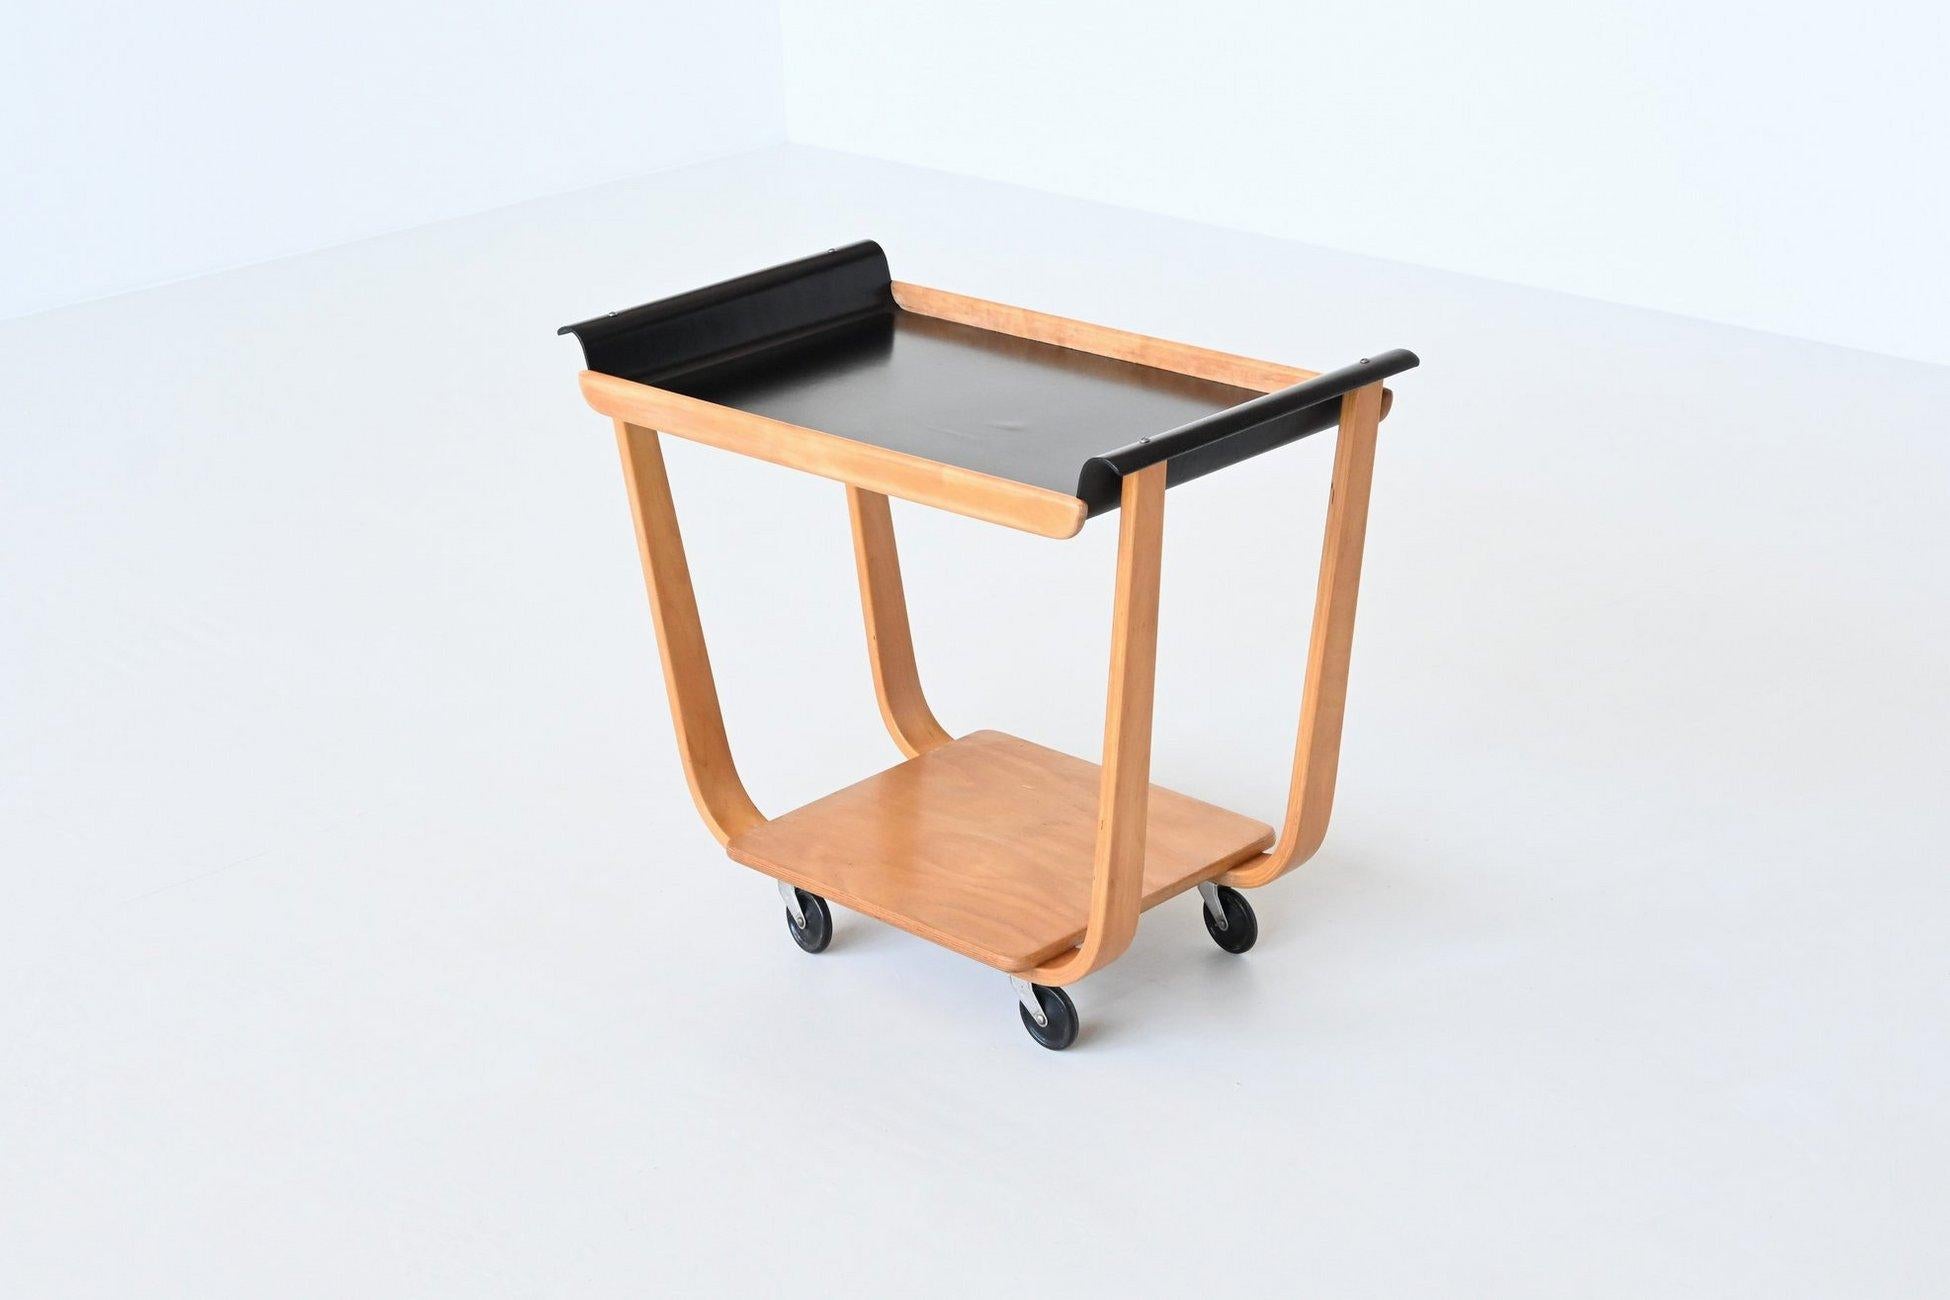 Very nice iconic serving trolley model Rolo PB31 designed by Cees Braakman for UMS Pastoe, The Netherlands 1950. This beautiful serving trolley is made of birch veneered plywood and has a black lacquered top. The top features organically curved